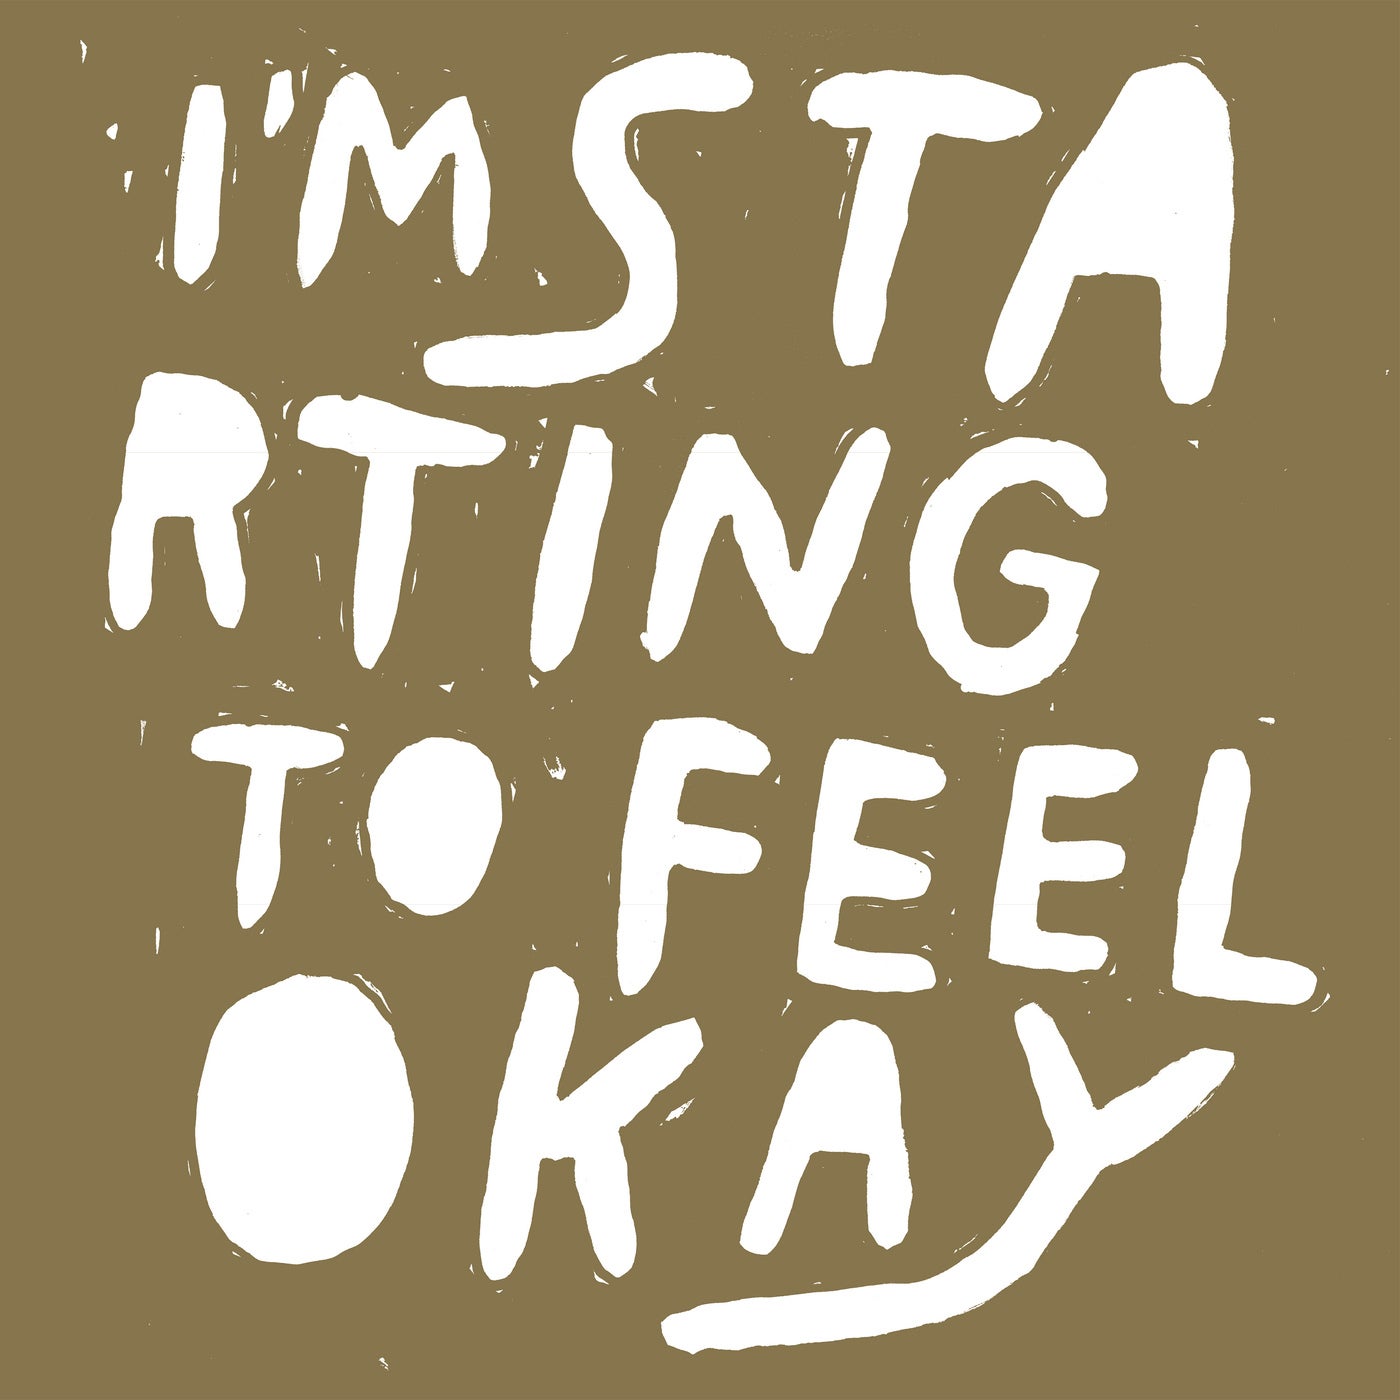 I'm Starting To Feel Ok Vol. 6 - 10 Years Edition Pt. 1